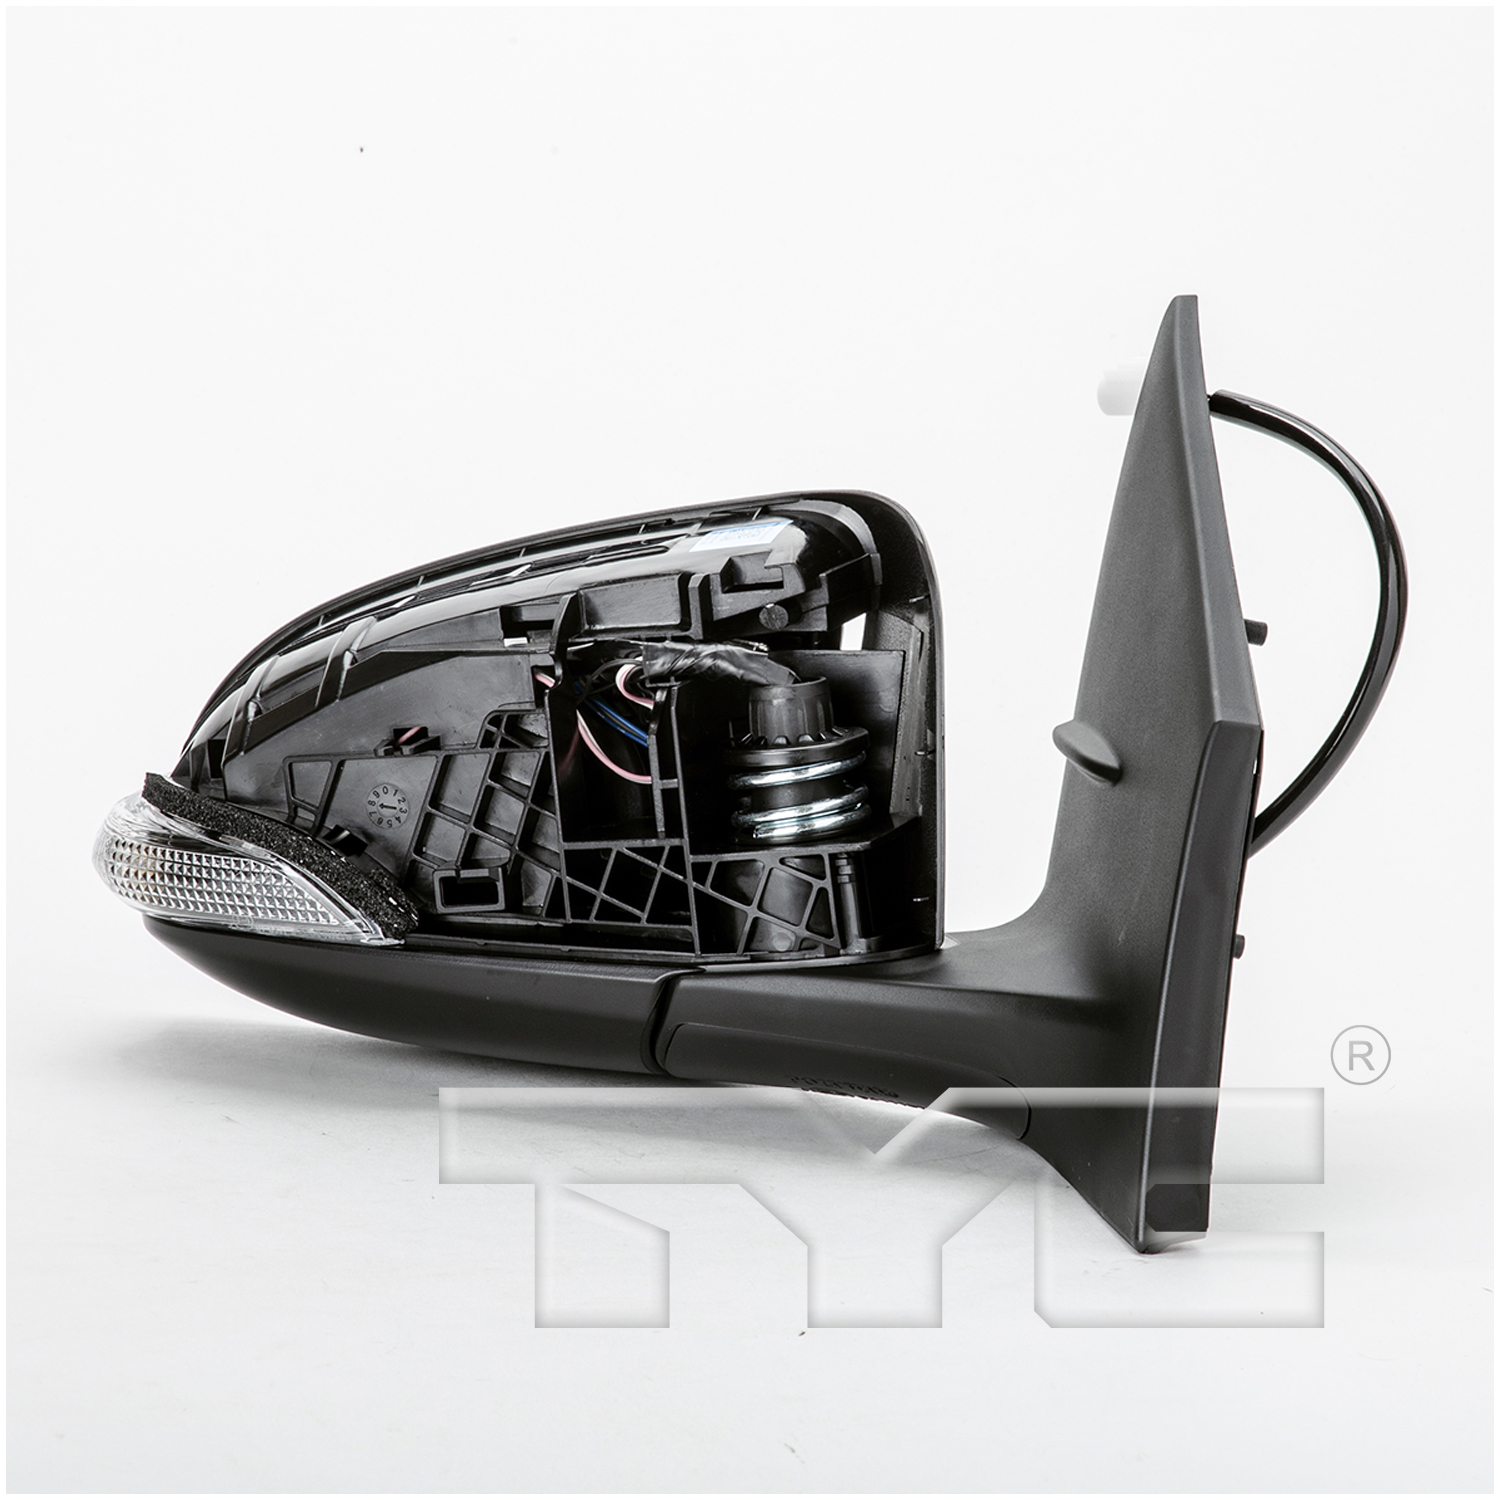 Aftermarket MIRRORS for TOYOTA - COROLLA, COROLLA,14-19,RT Mirror outside rear view